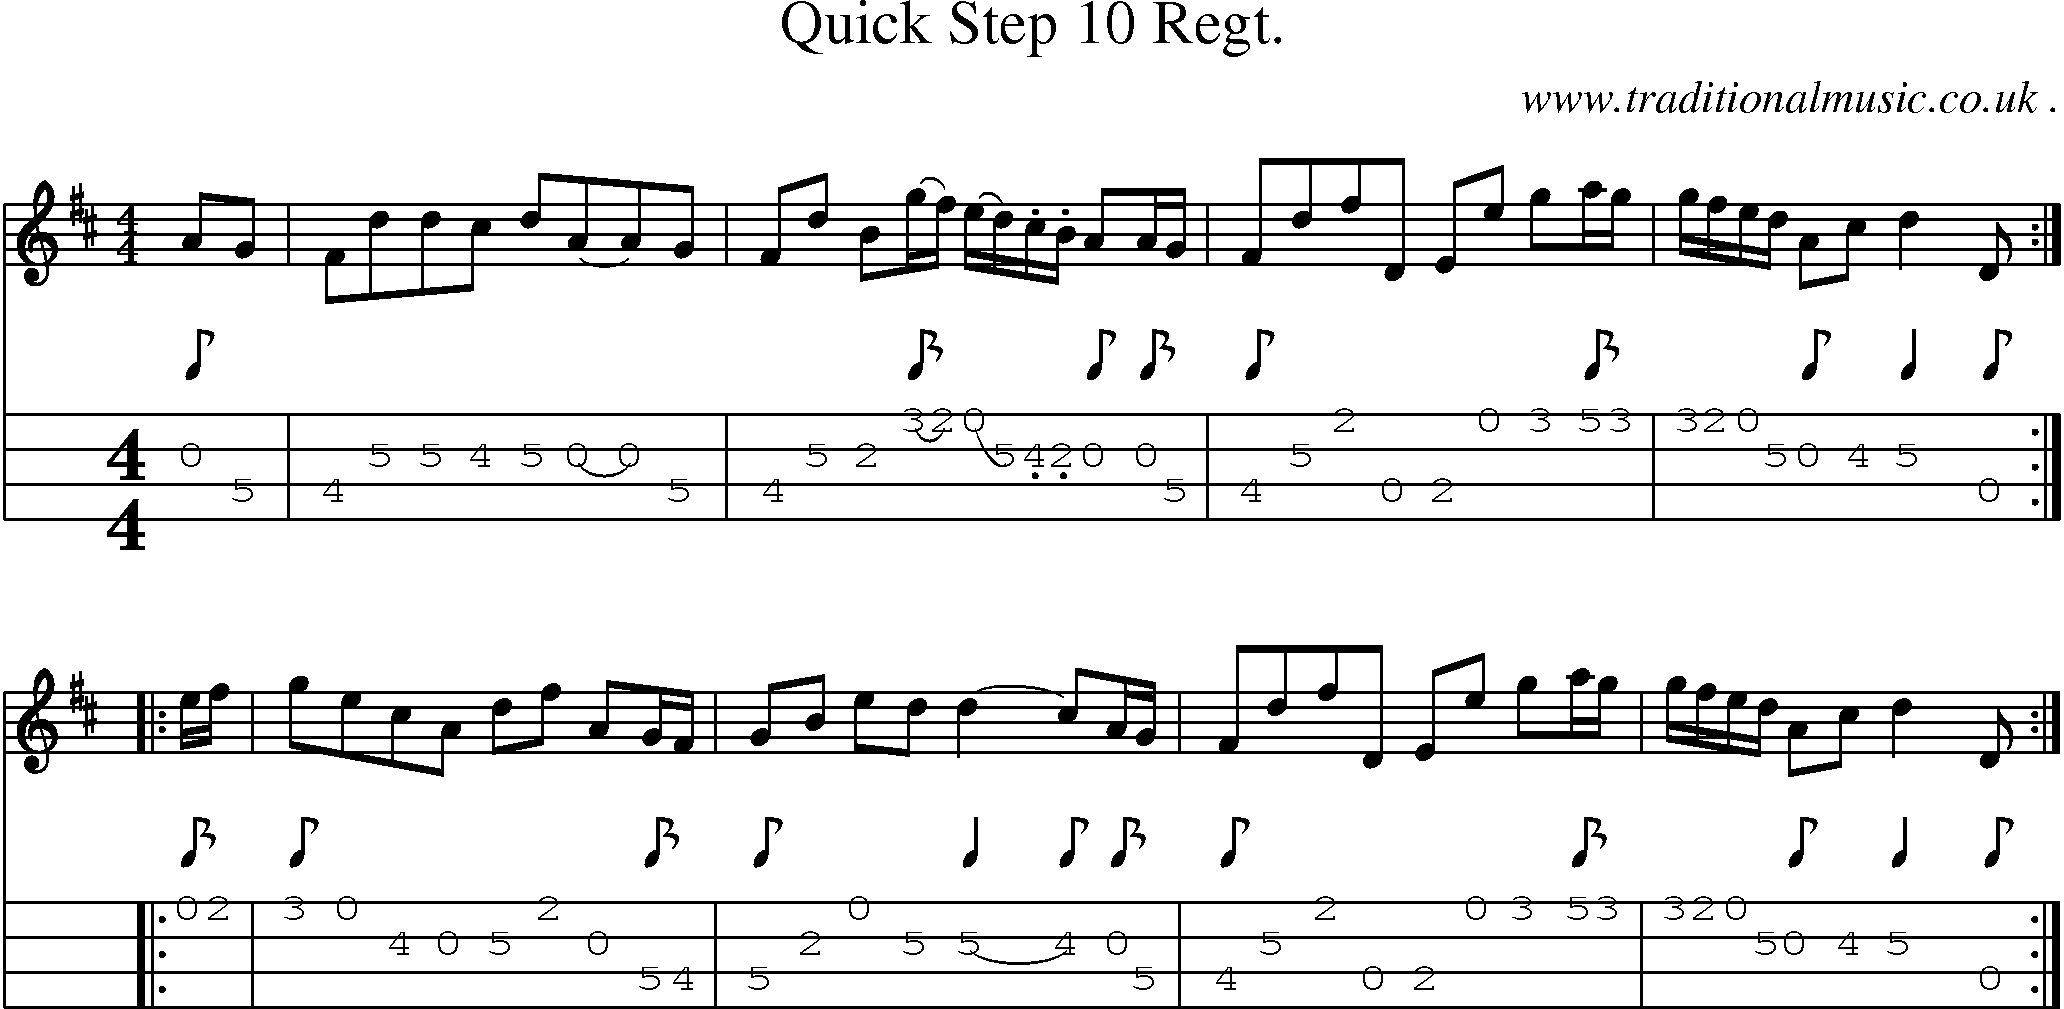 Sheet-music  score, Chords and Mandolin Tabs for Quick Step 10 Regt